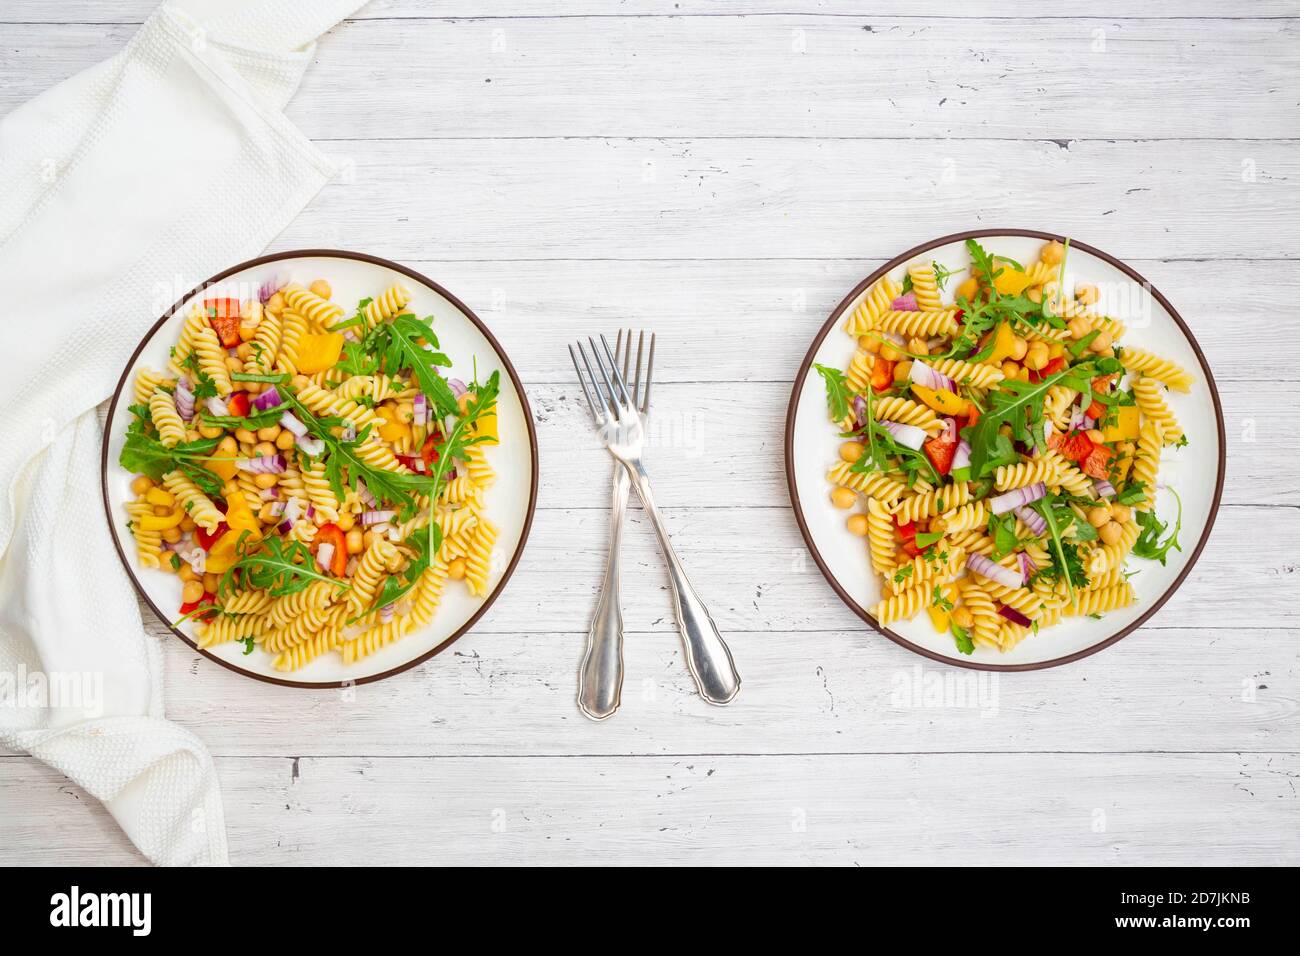 Two plates of vegetarian pasta salad with chick-peas, bell pepper, arugula, onion, parsley and basil Stock Photo